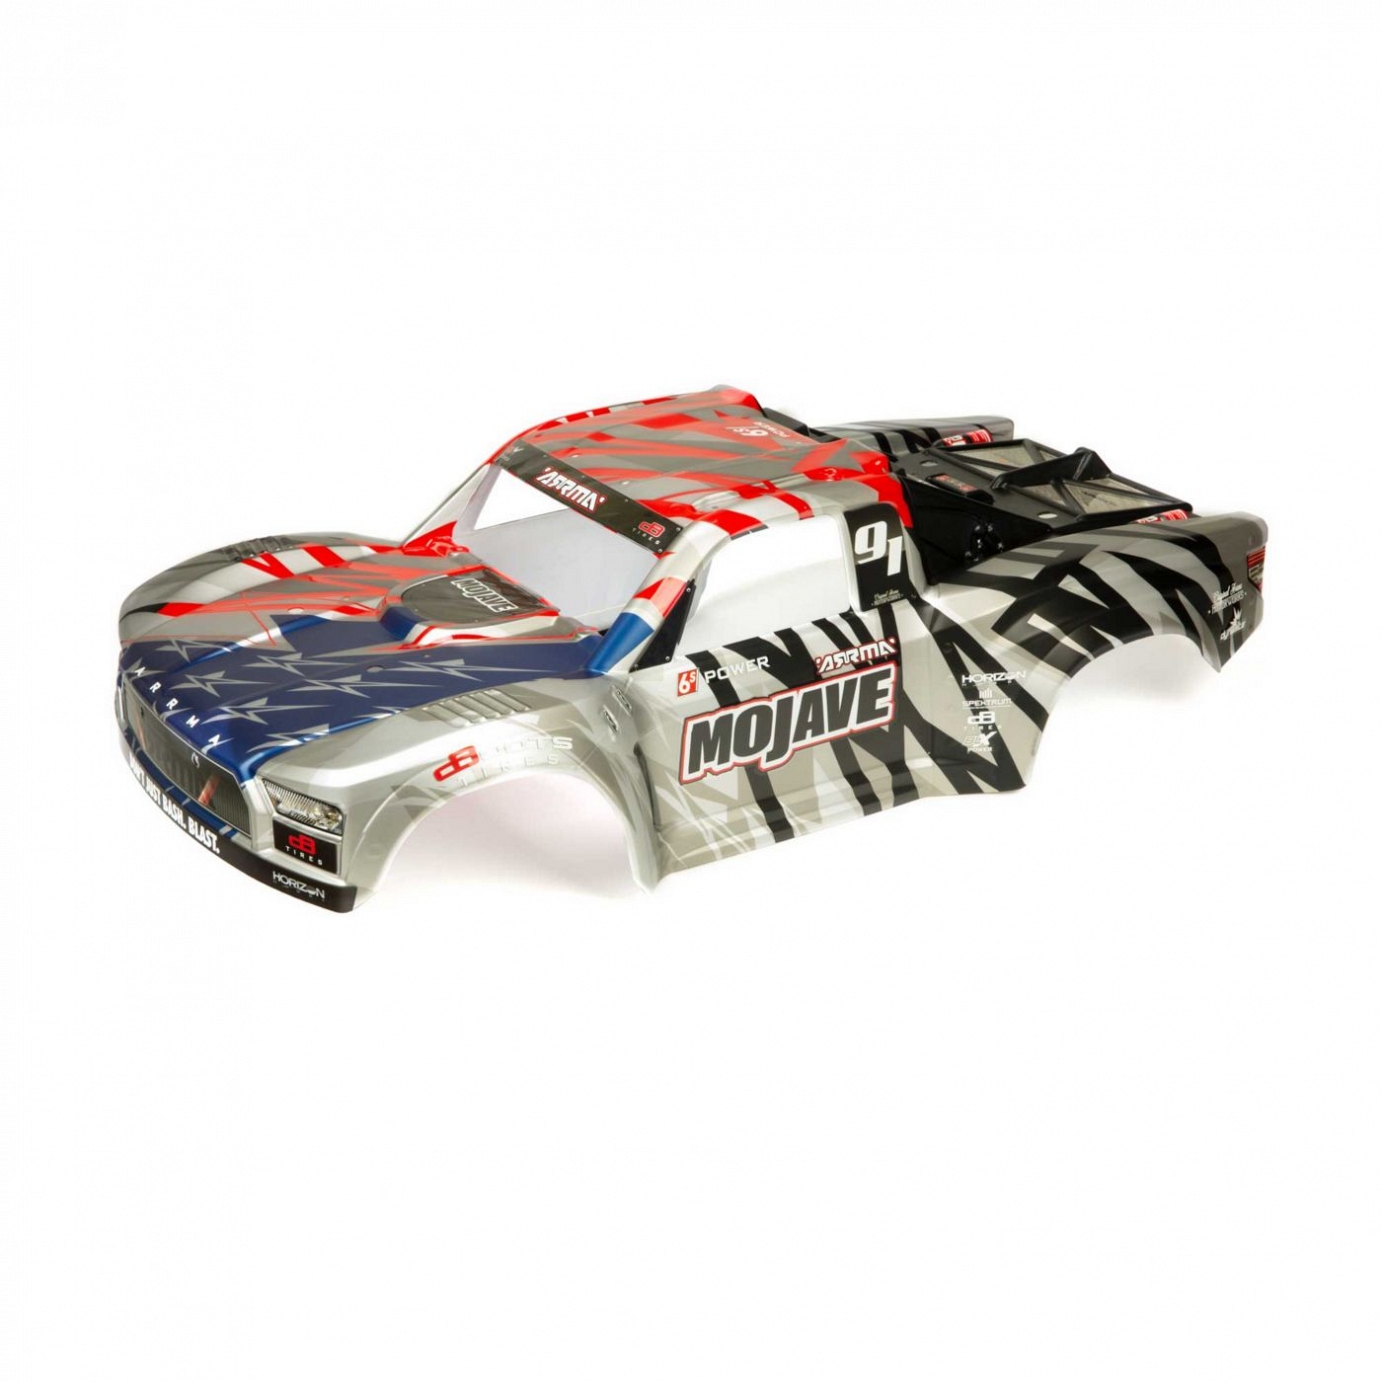 Arrma 6S Finished Body, Silver/Red, Mojave